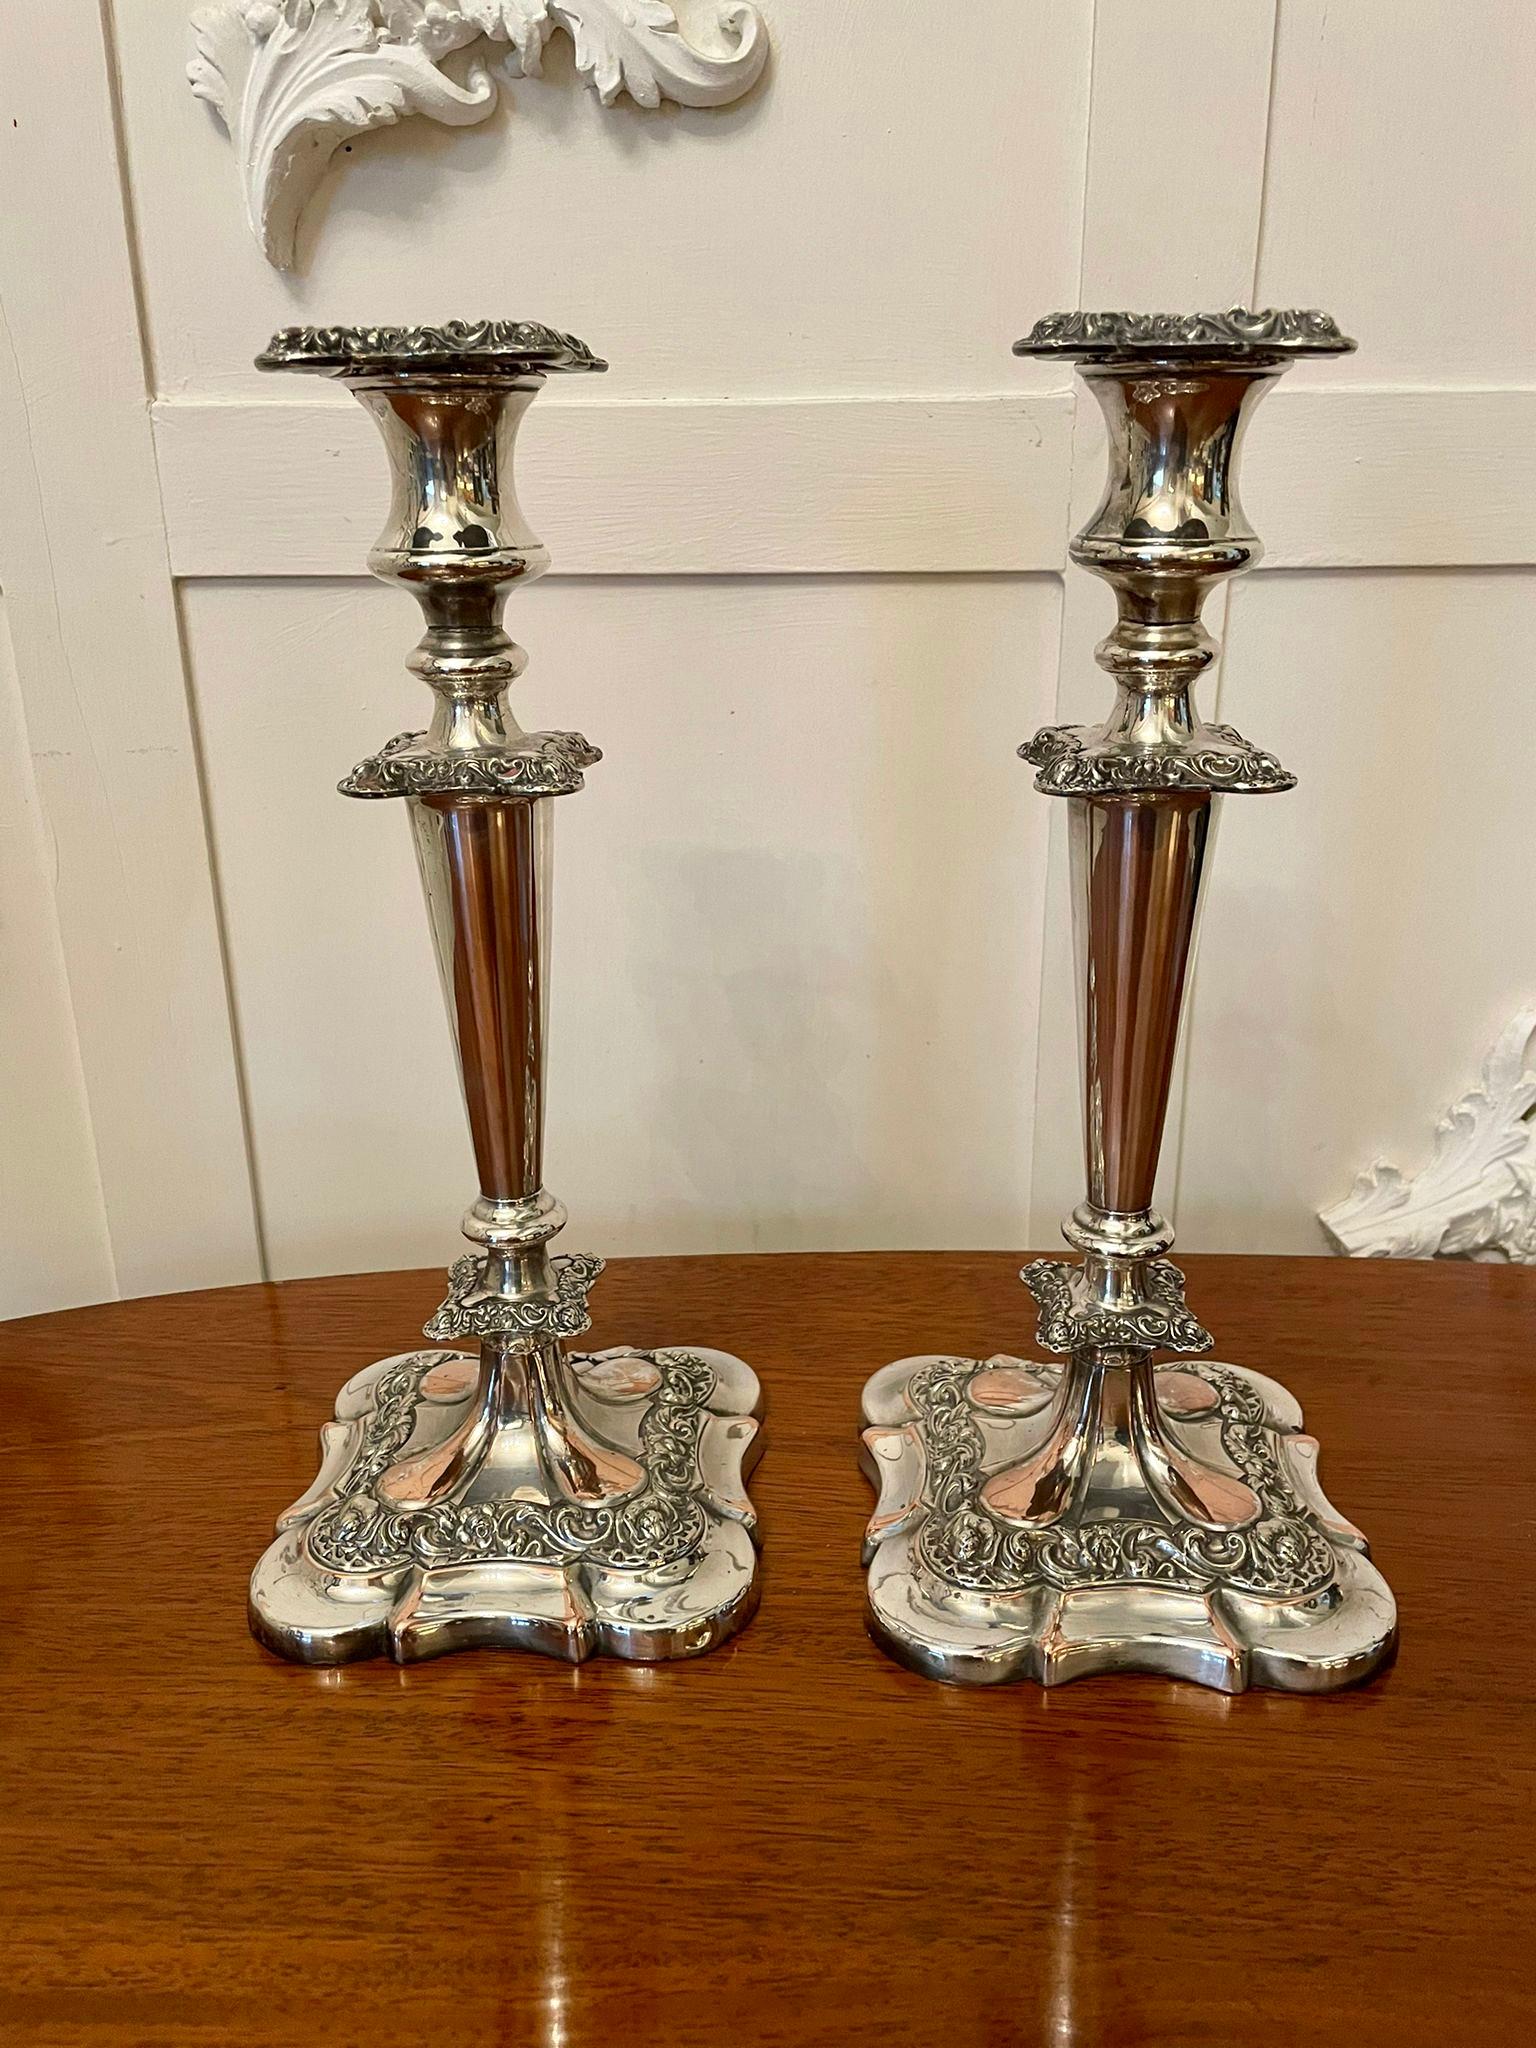 19th Century Large Pair of Quality Antique Victorian Sheffield Plated Ornate Candlesticks For Sale